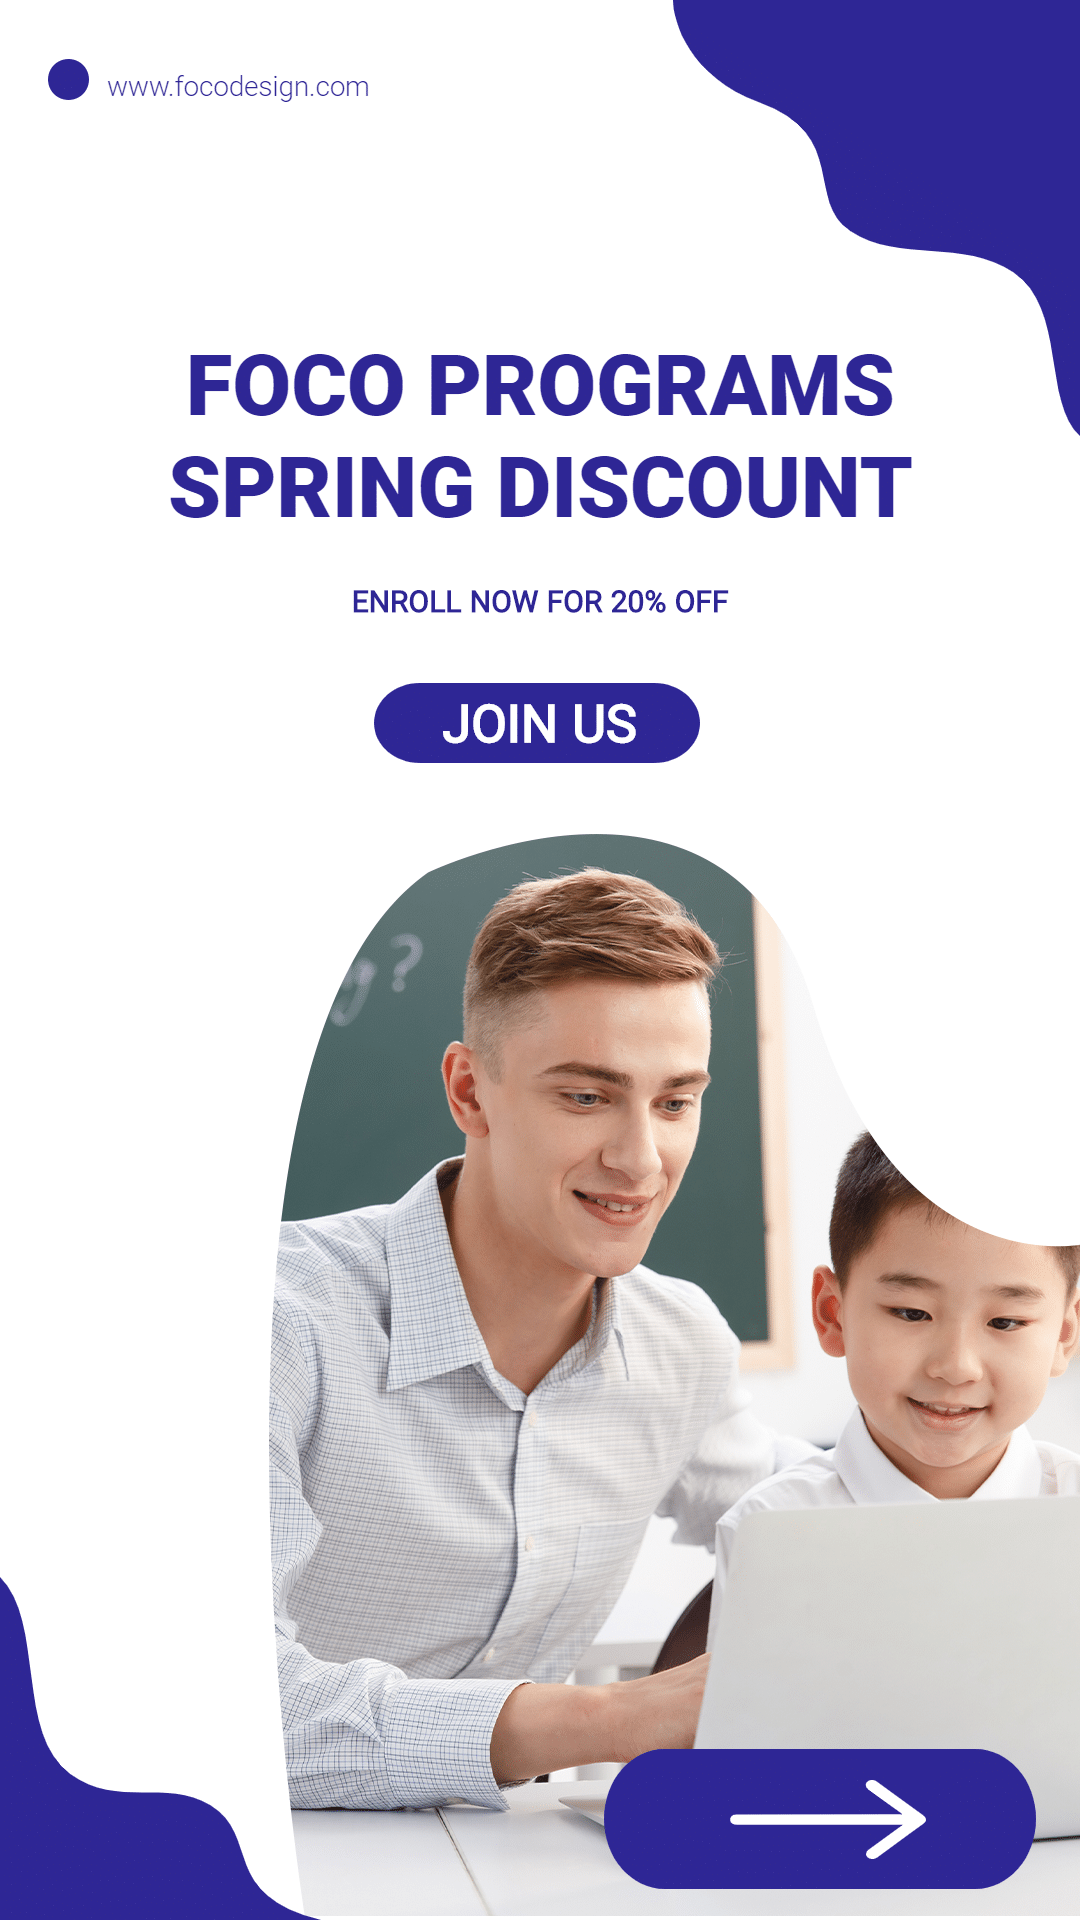 Simple Extra-Curricular Tutoring Spring Discount Ecommerce Story预览效果